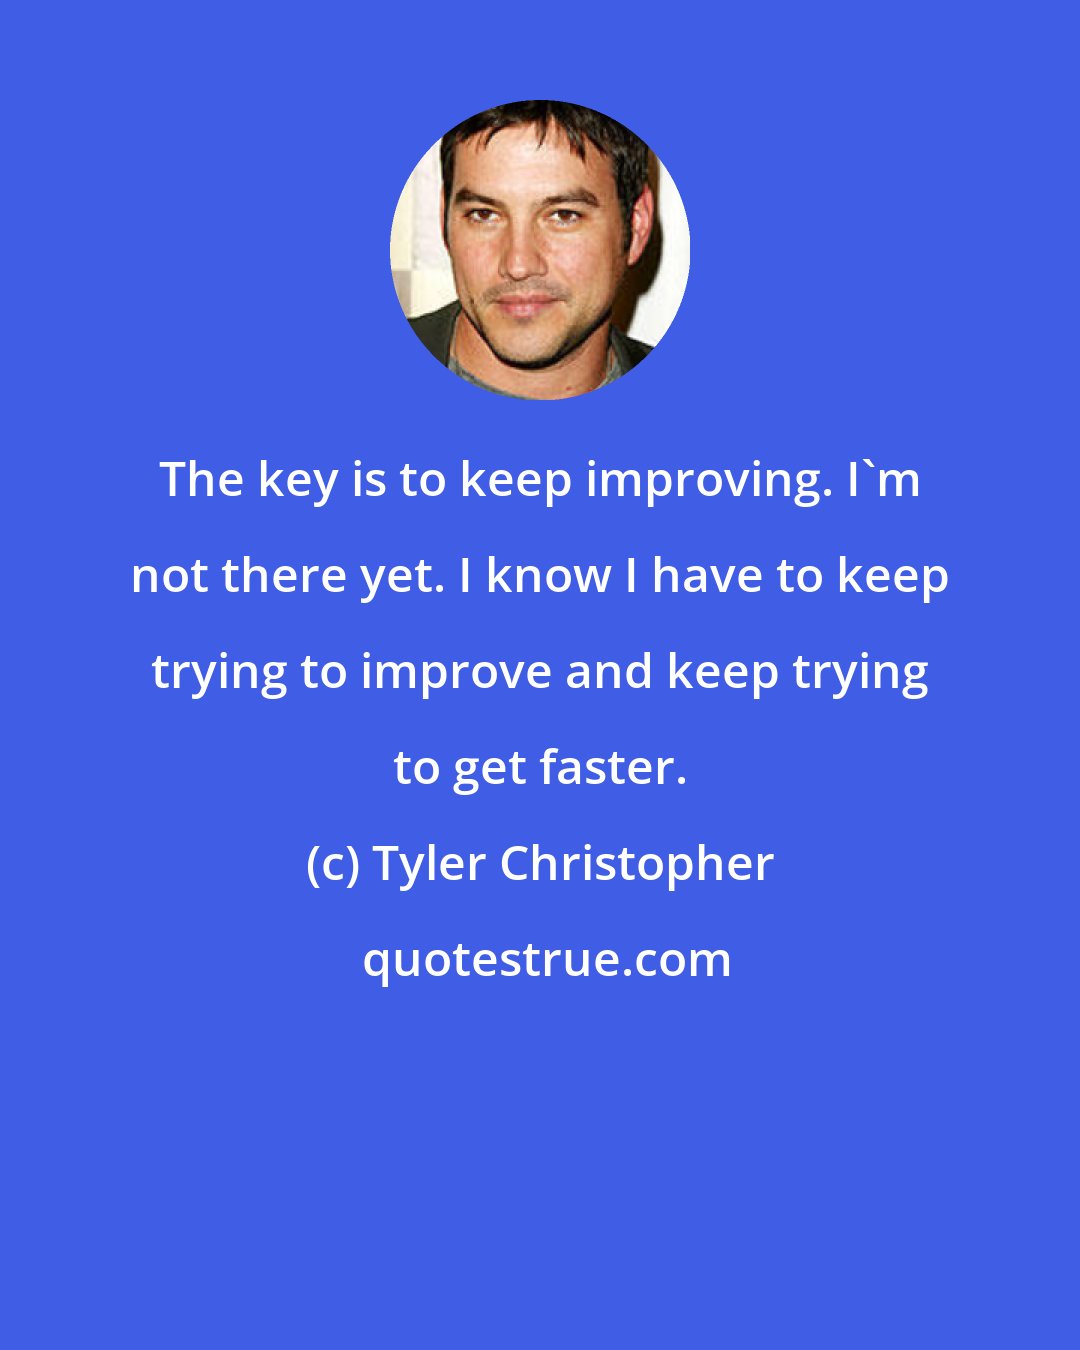 Tyler Christopher: The key is to keep improving. I'm not there yet. I know I have to keep trying to improve and keep trying to get faster.